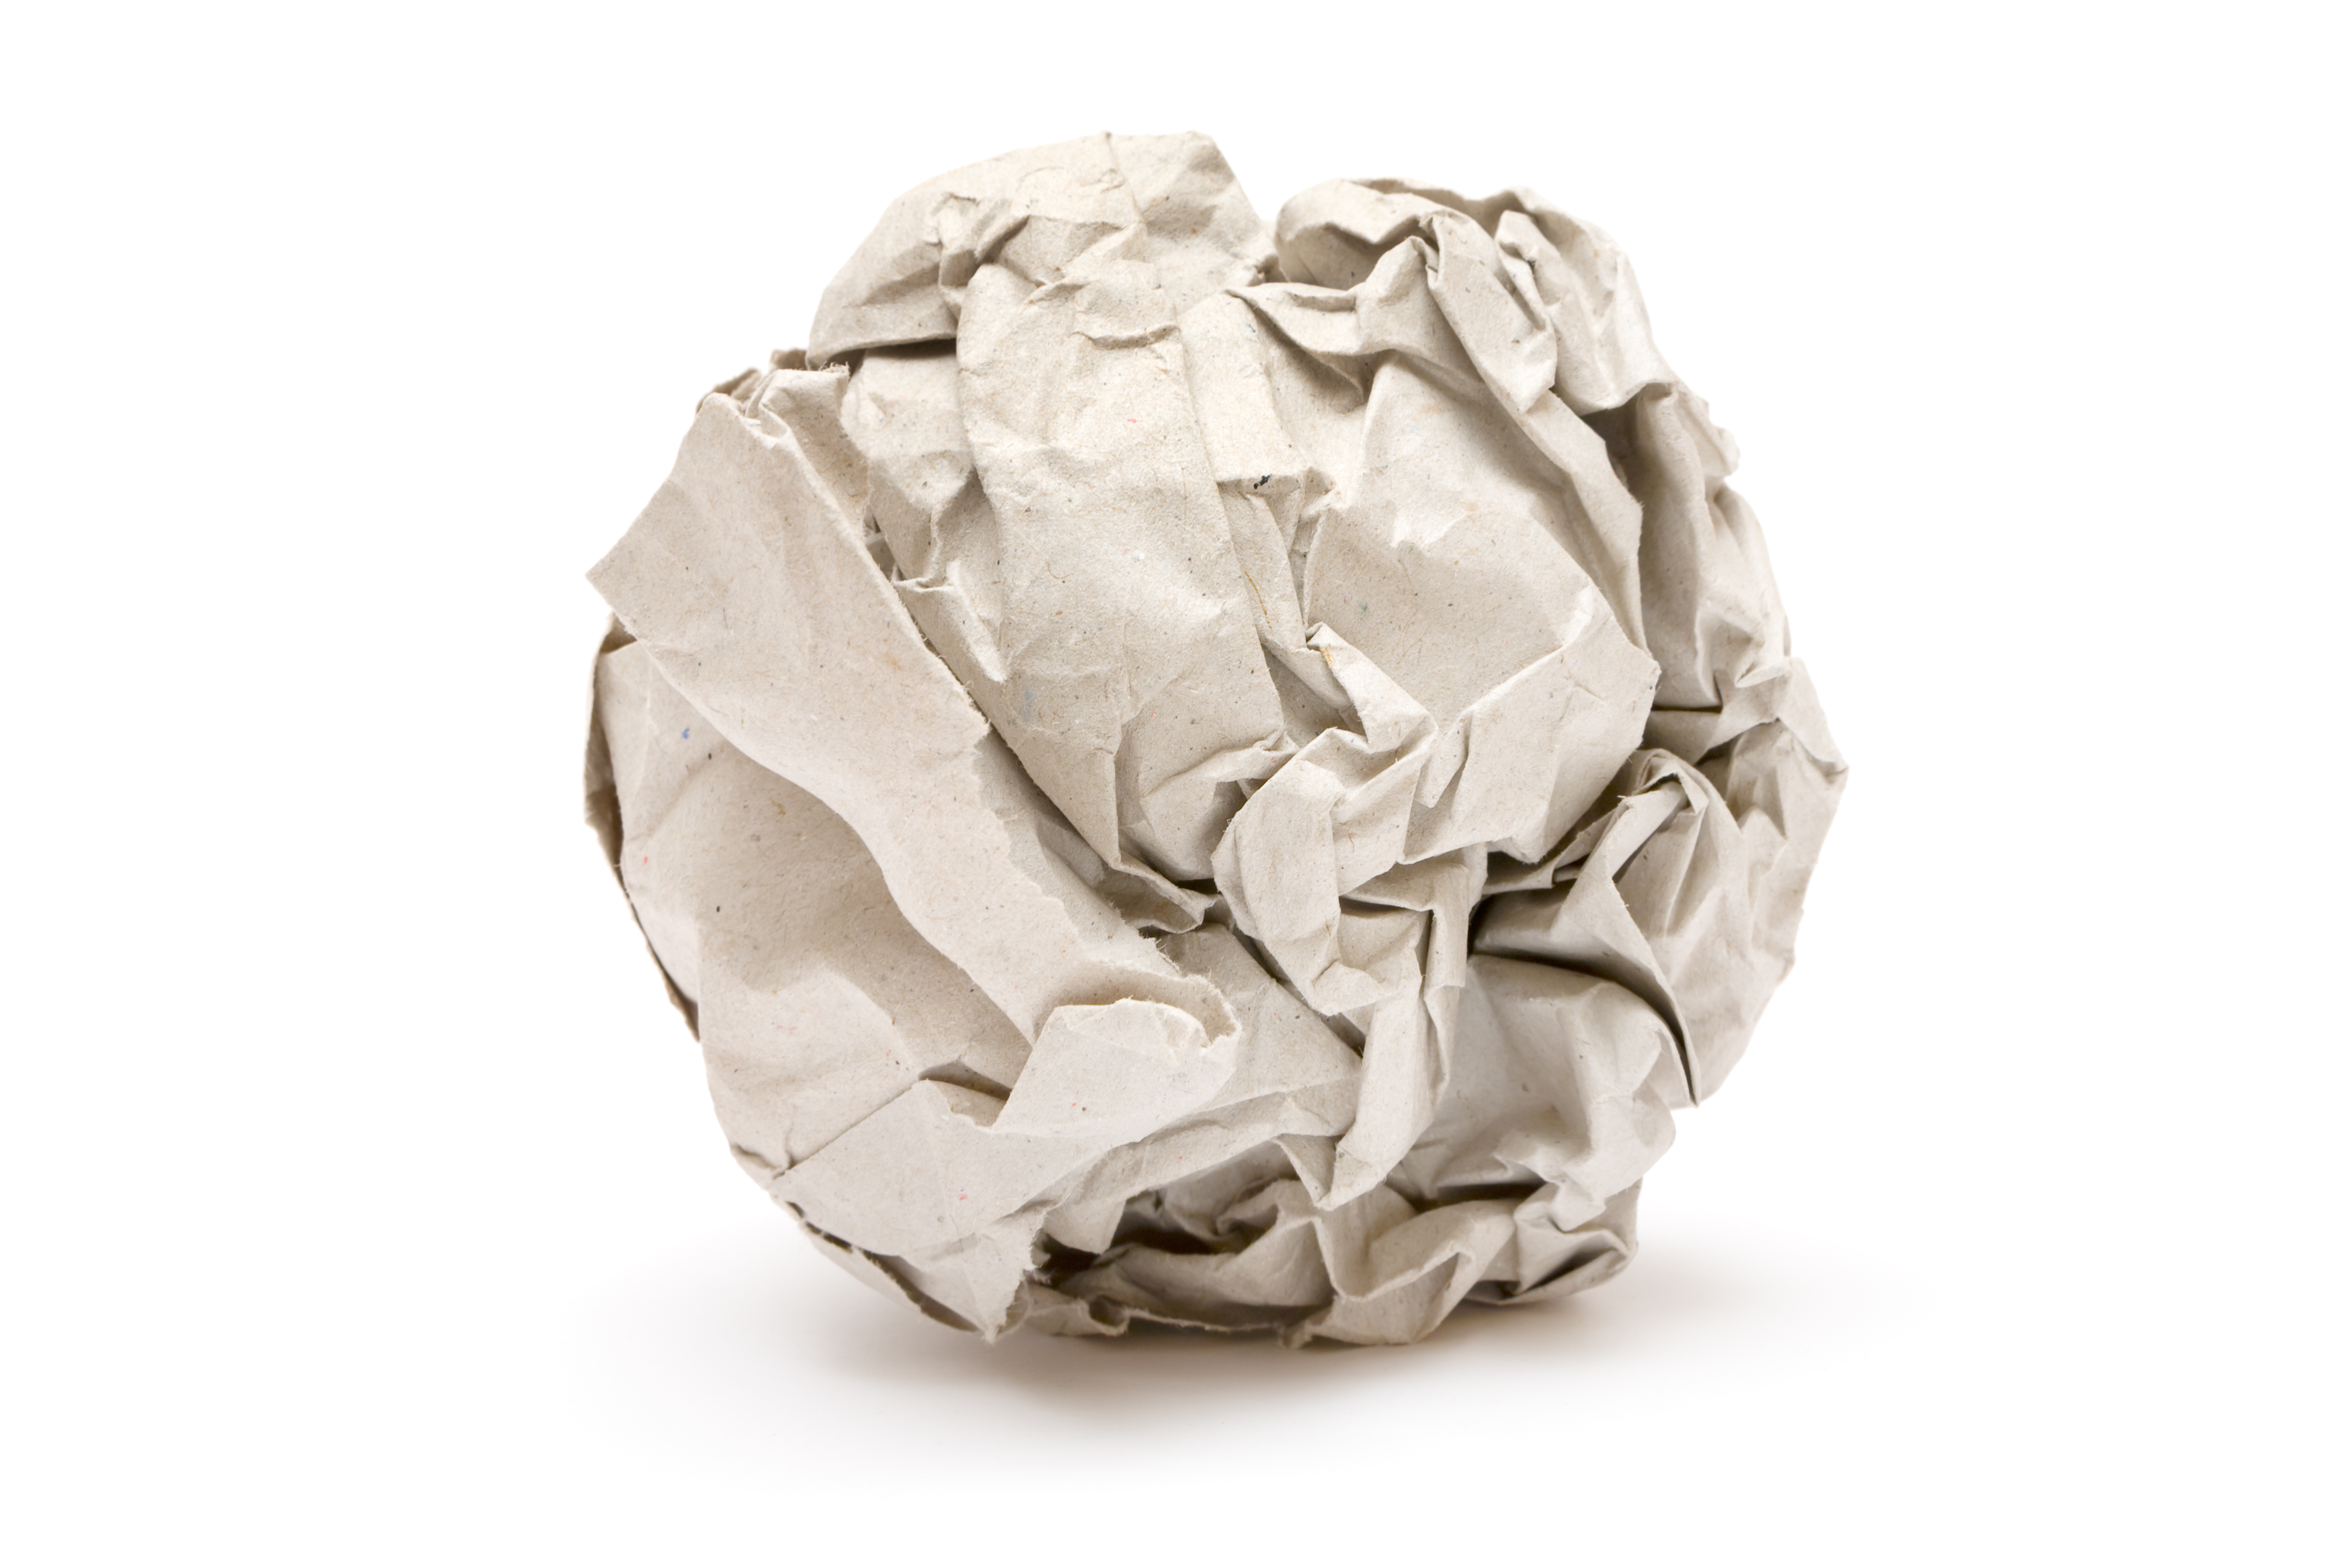 Crumpled paper isolated on a white background.